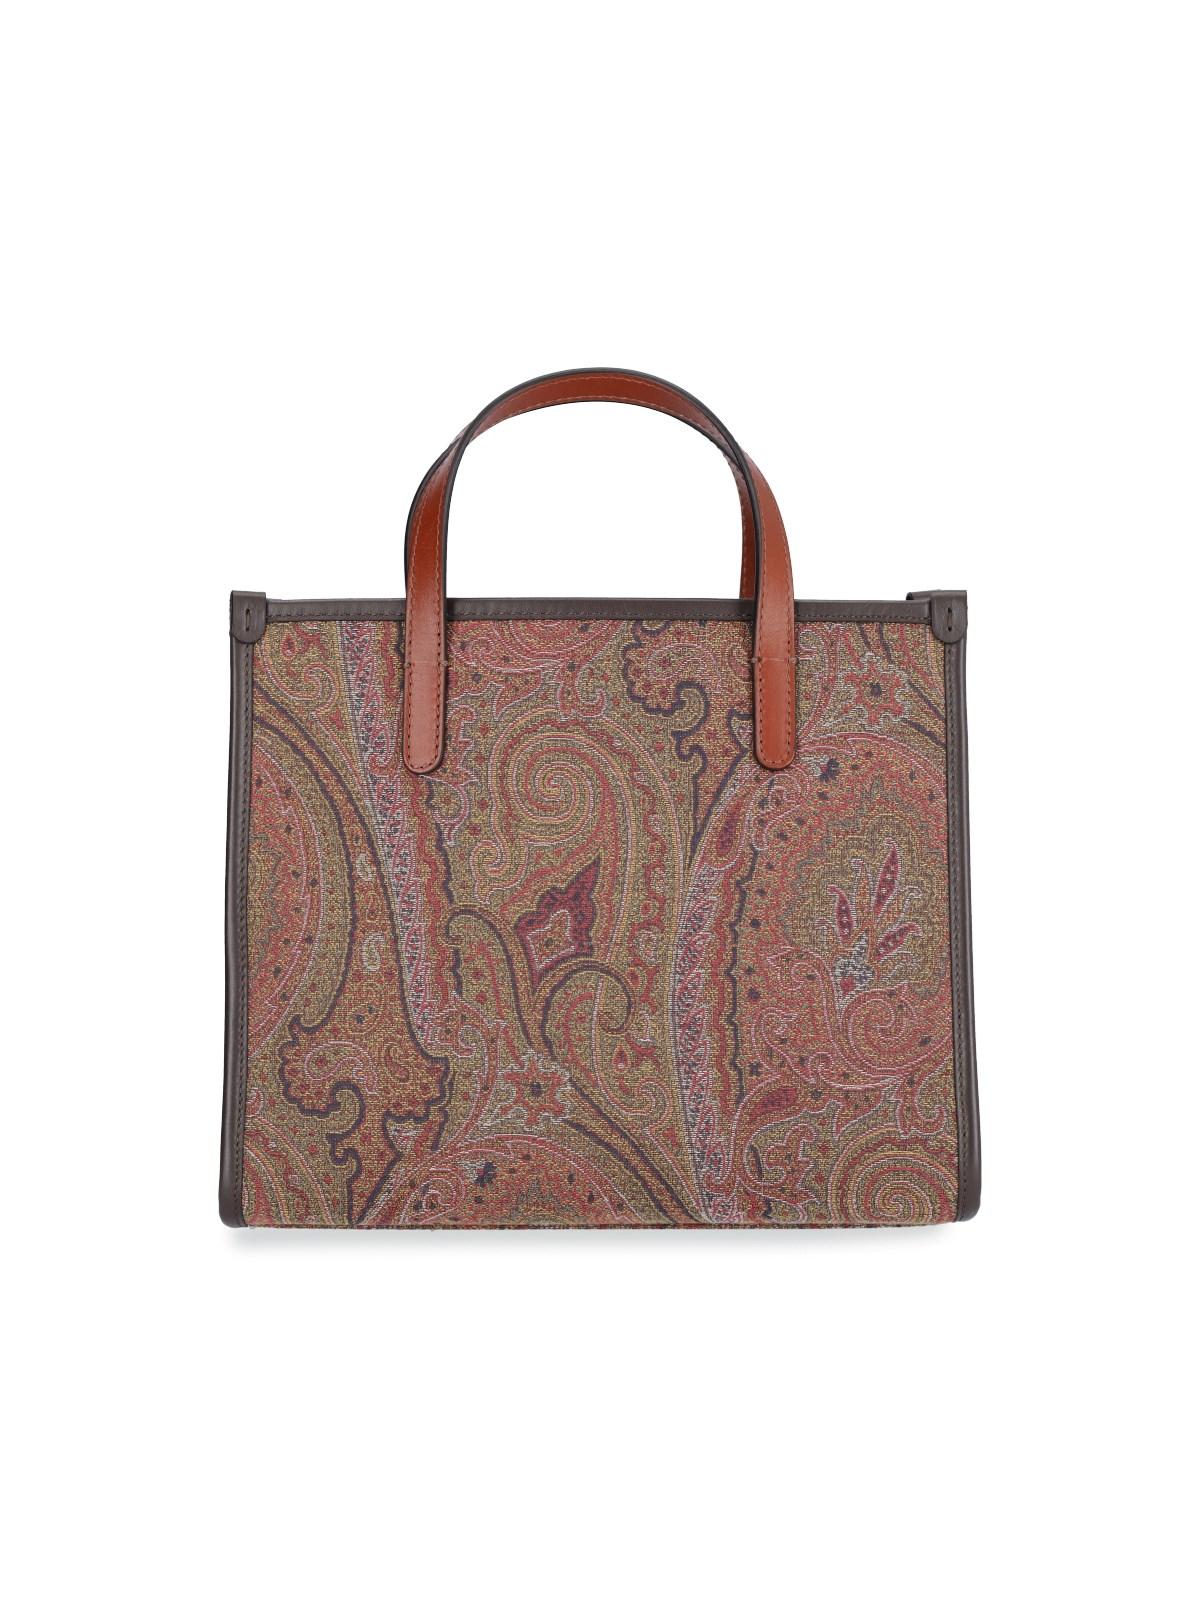 Etro 'paisley' Small Tote Bag in Brown | Lyst